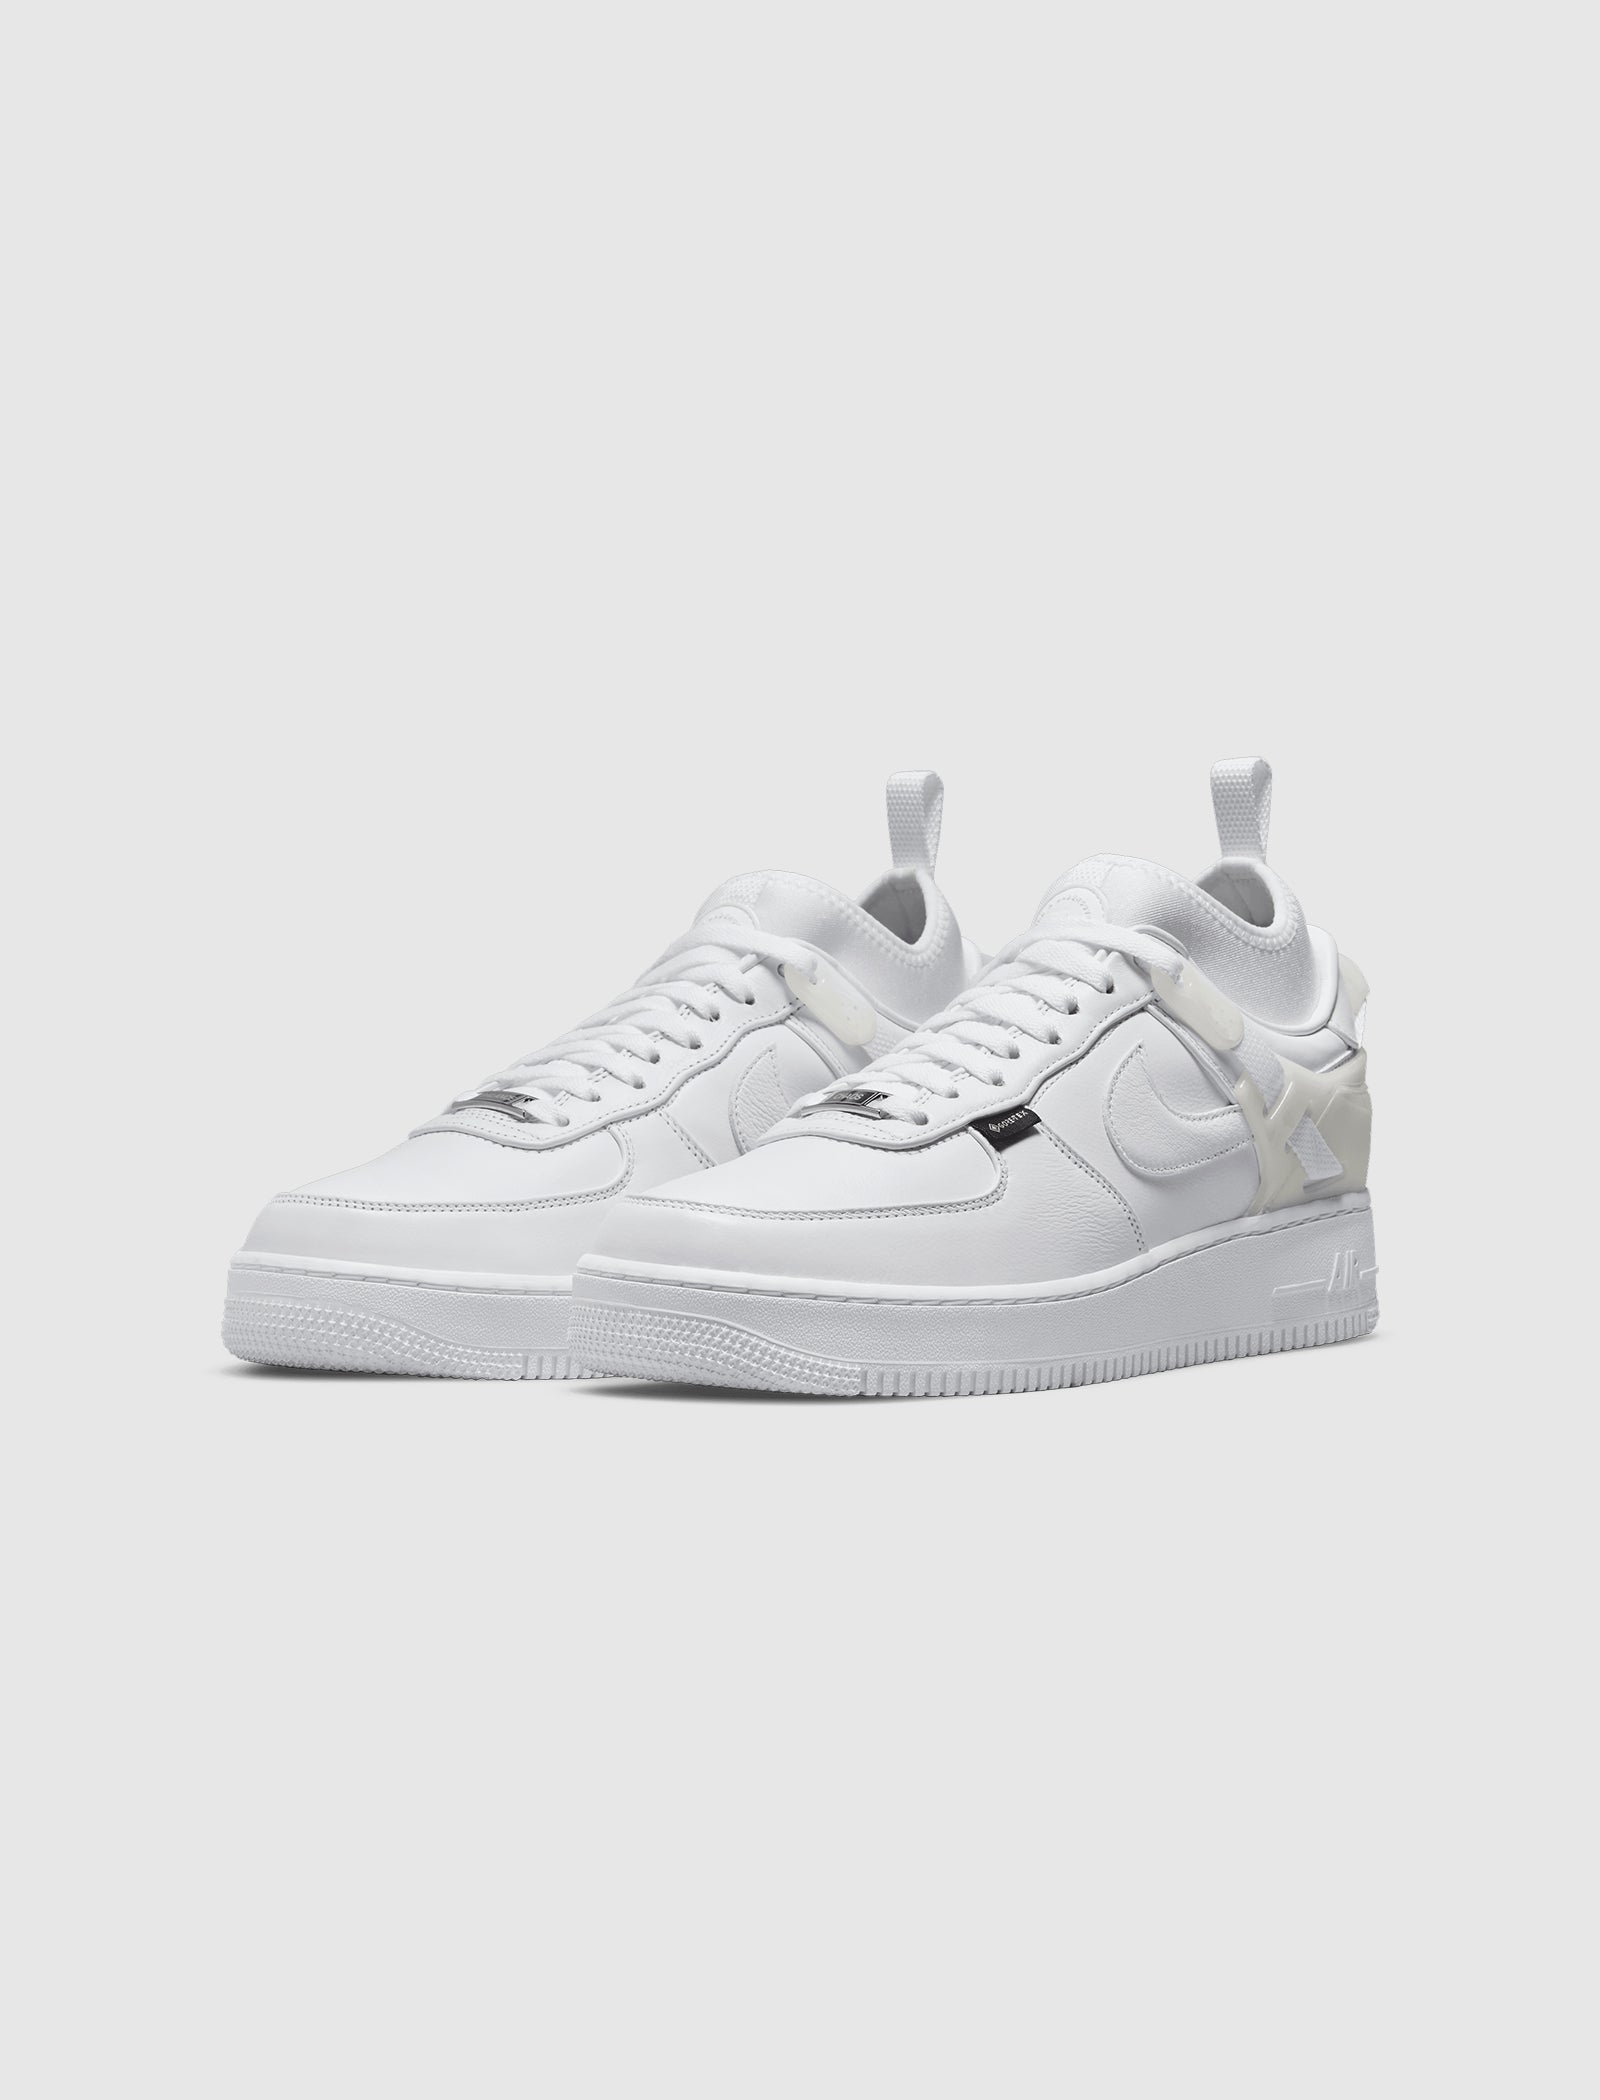 UNDERCOVER X AIR FORCE 1 LOW SP "WHITE"